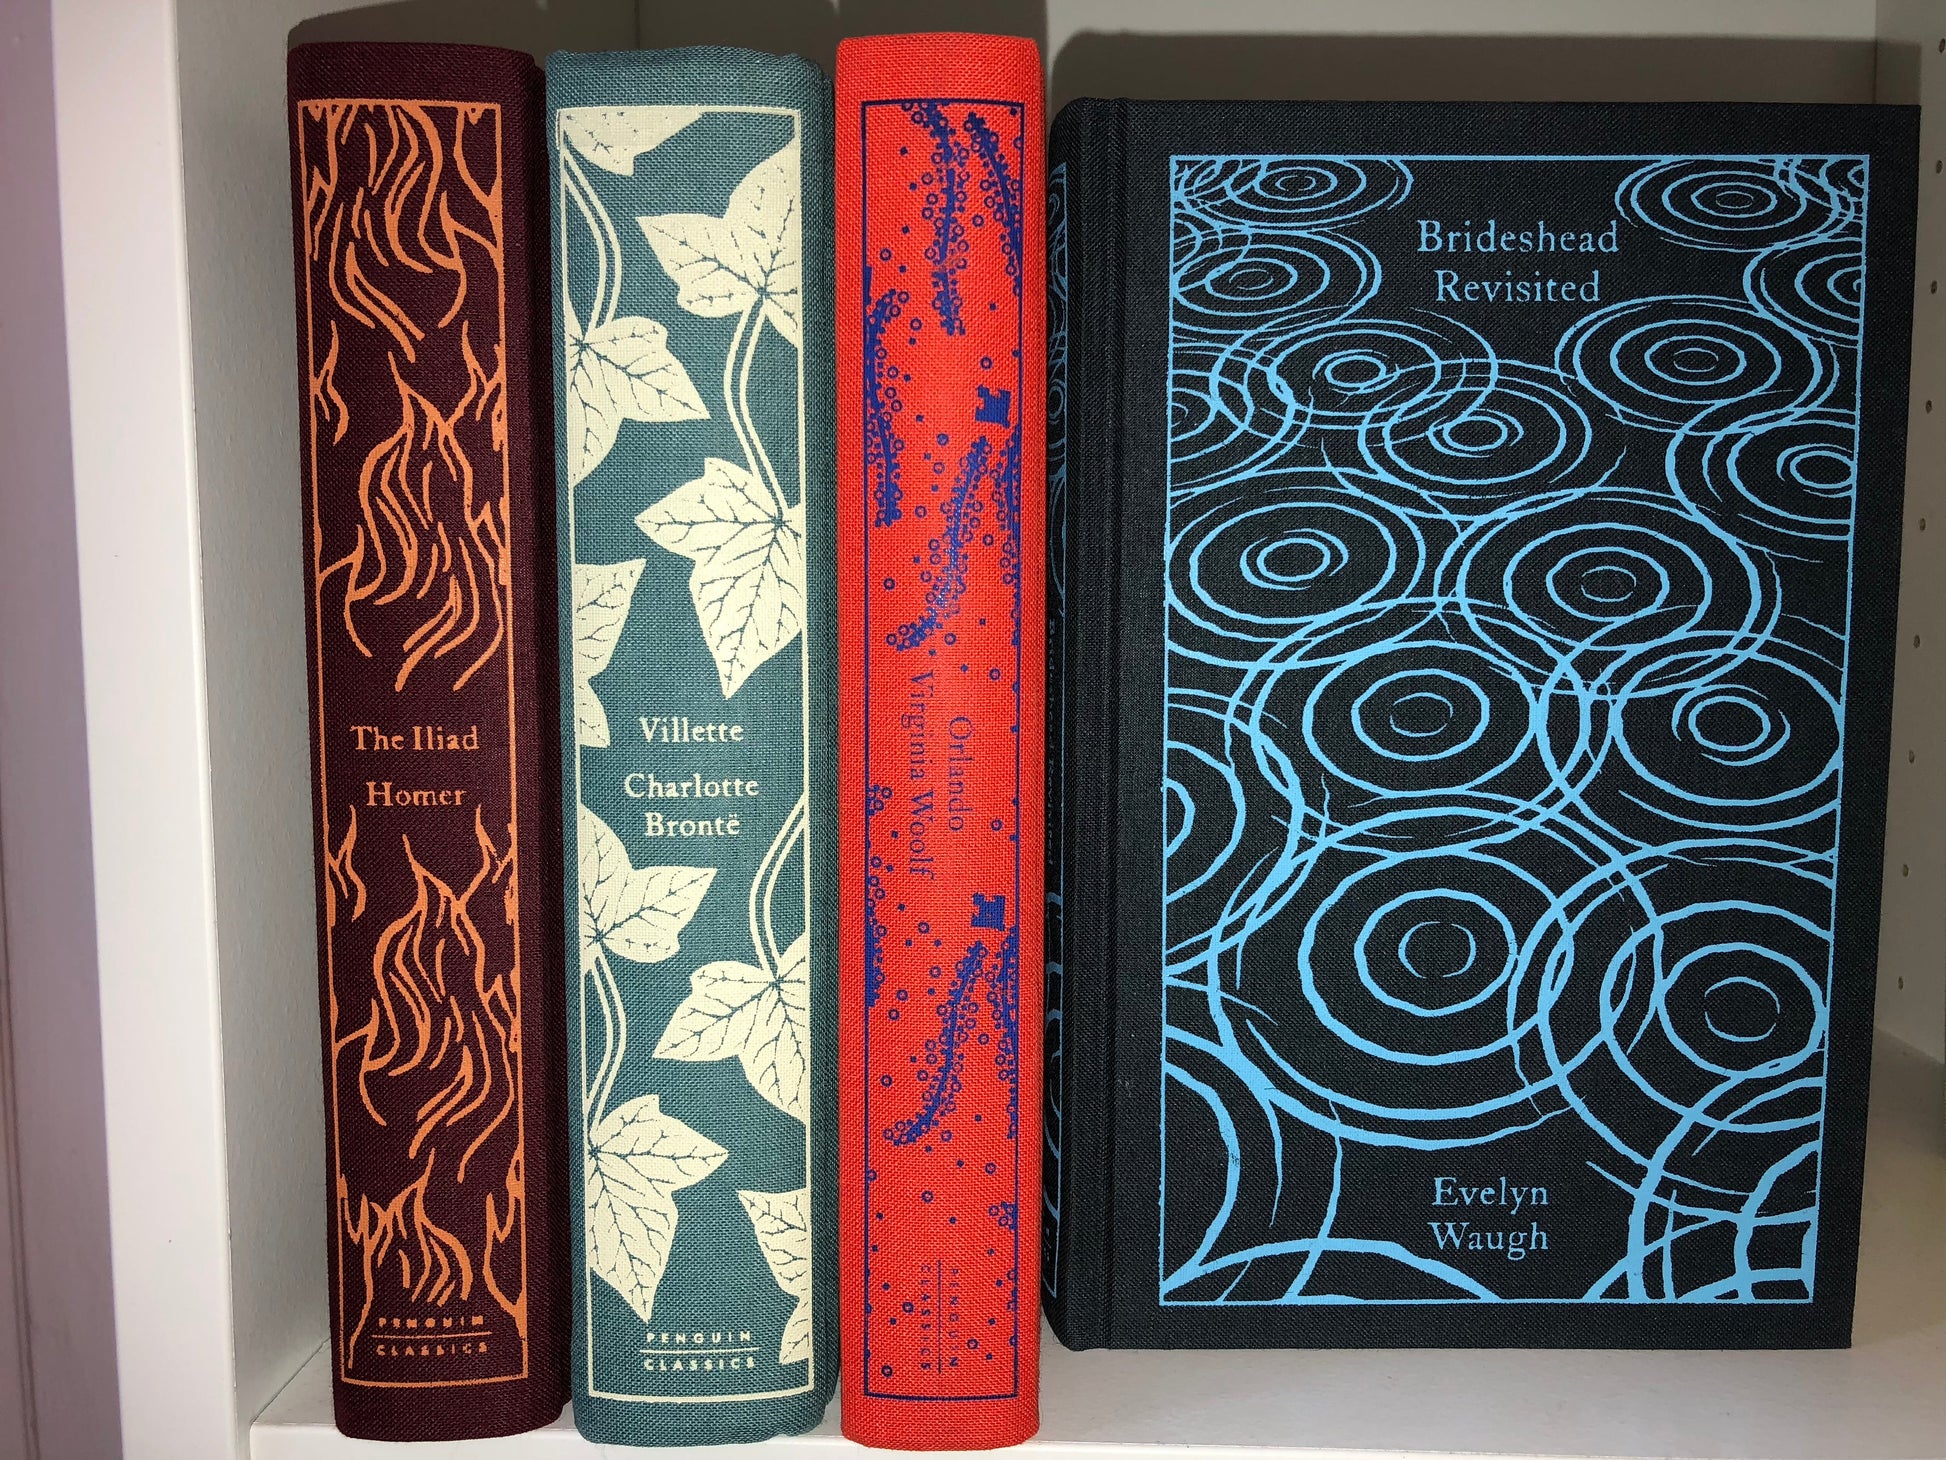 Major Works Of Charles Dickens (penguin Classics Hardcover Boxed Set) - ( penguin Clothbound Classics) (mixed Media Product) : Target